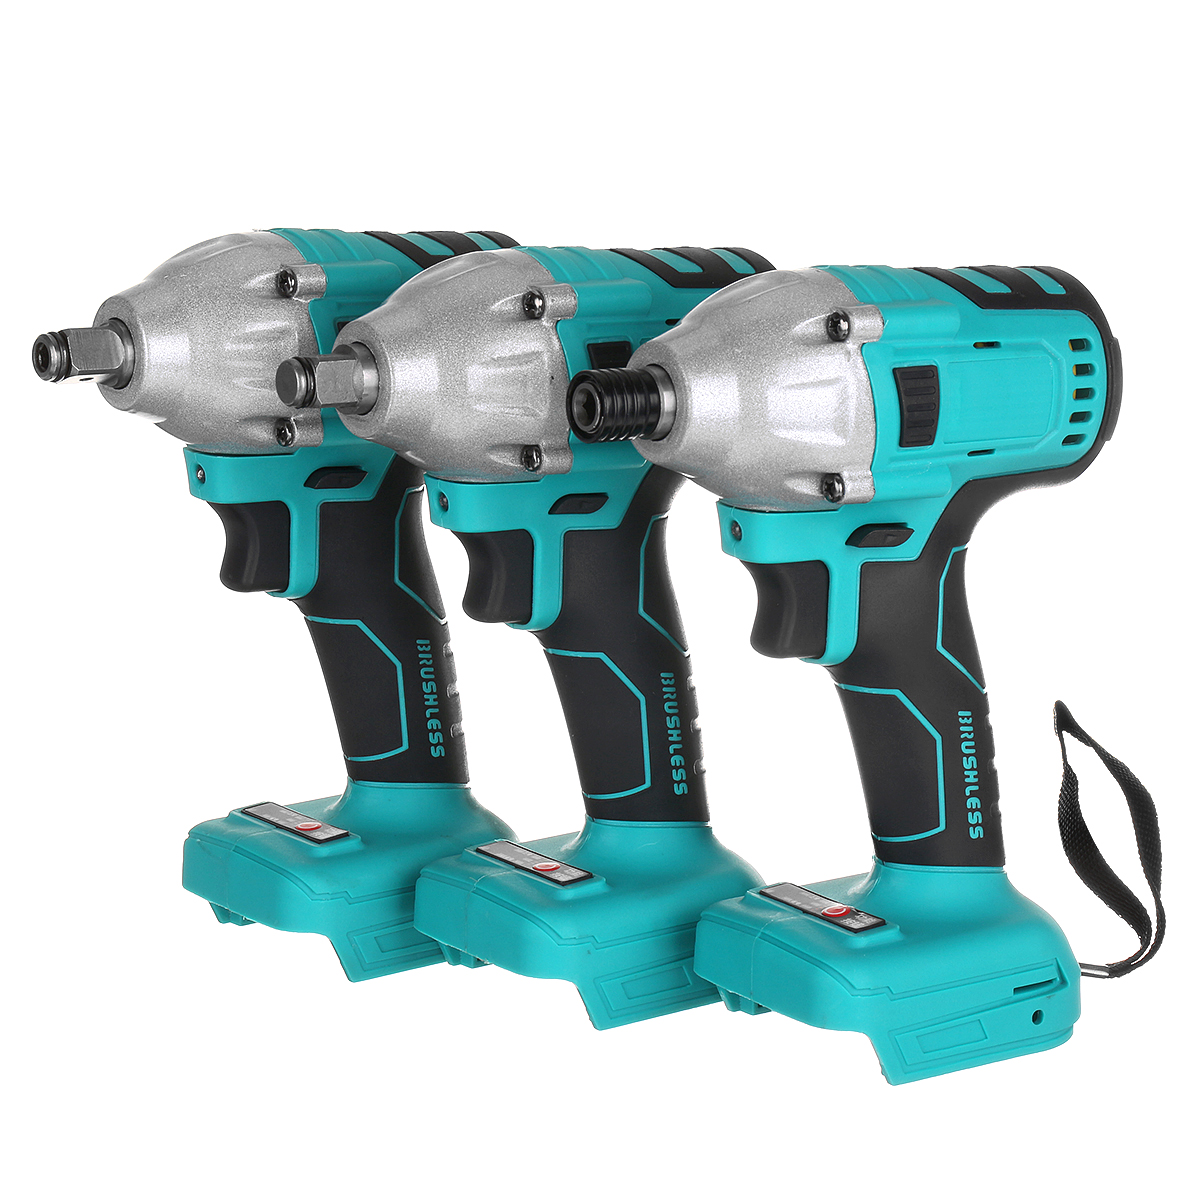 Blue-Cordless-Brushless-Impact-Wrench-Drill-Drive-Machine-For-Makita-18V-Battery-1769333-7